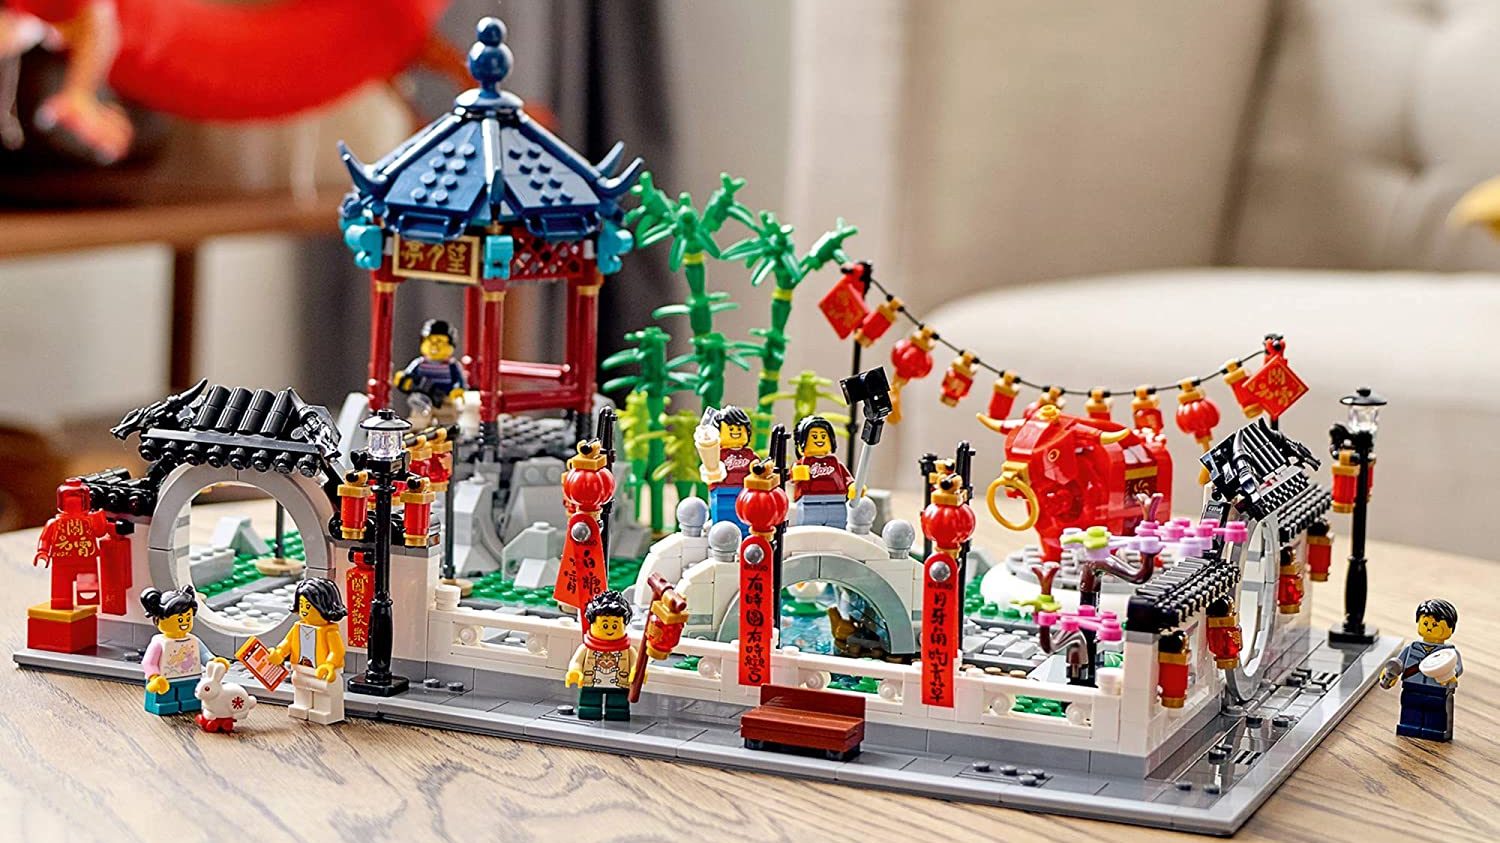 Spring Lantern Festival is a great lunar new year gift for kids